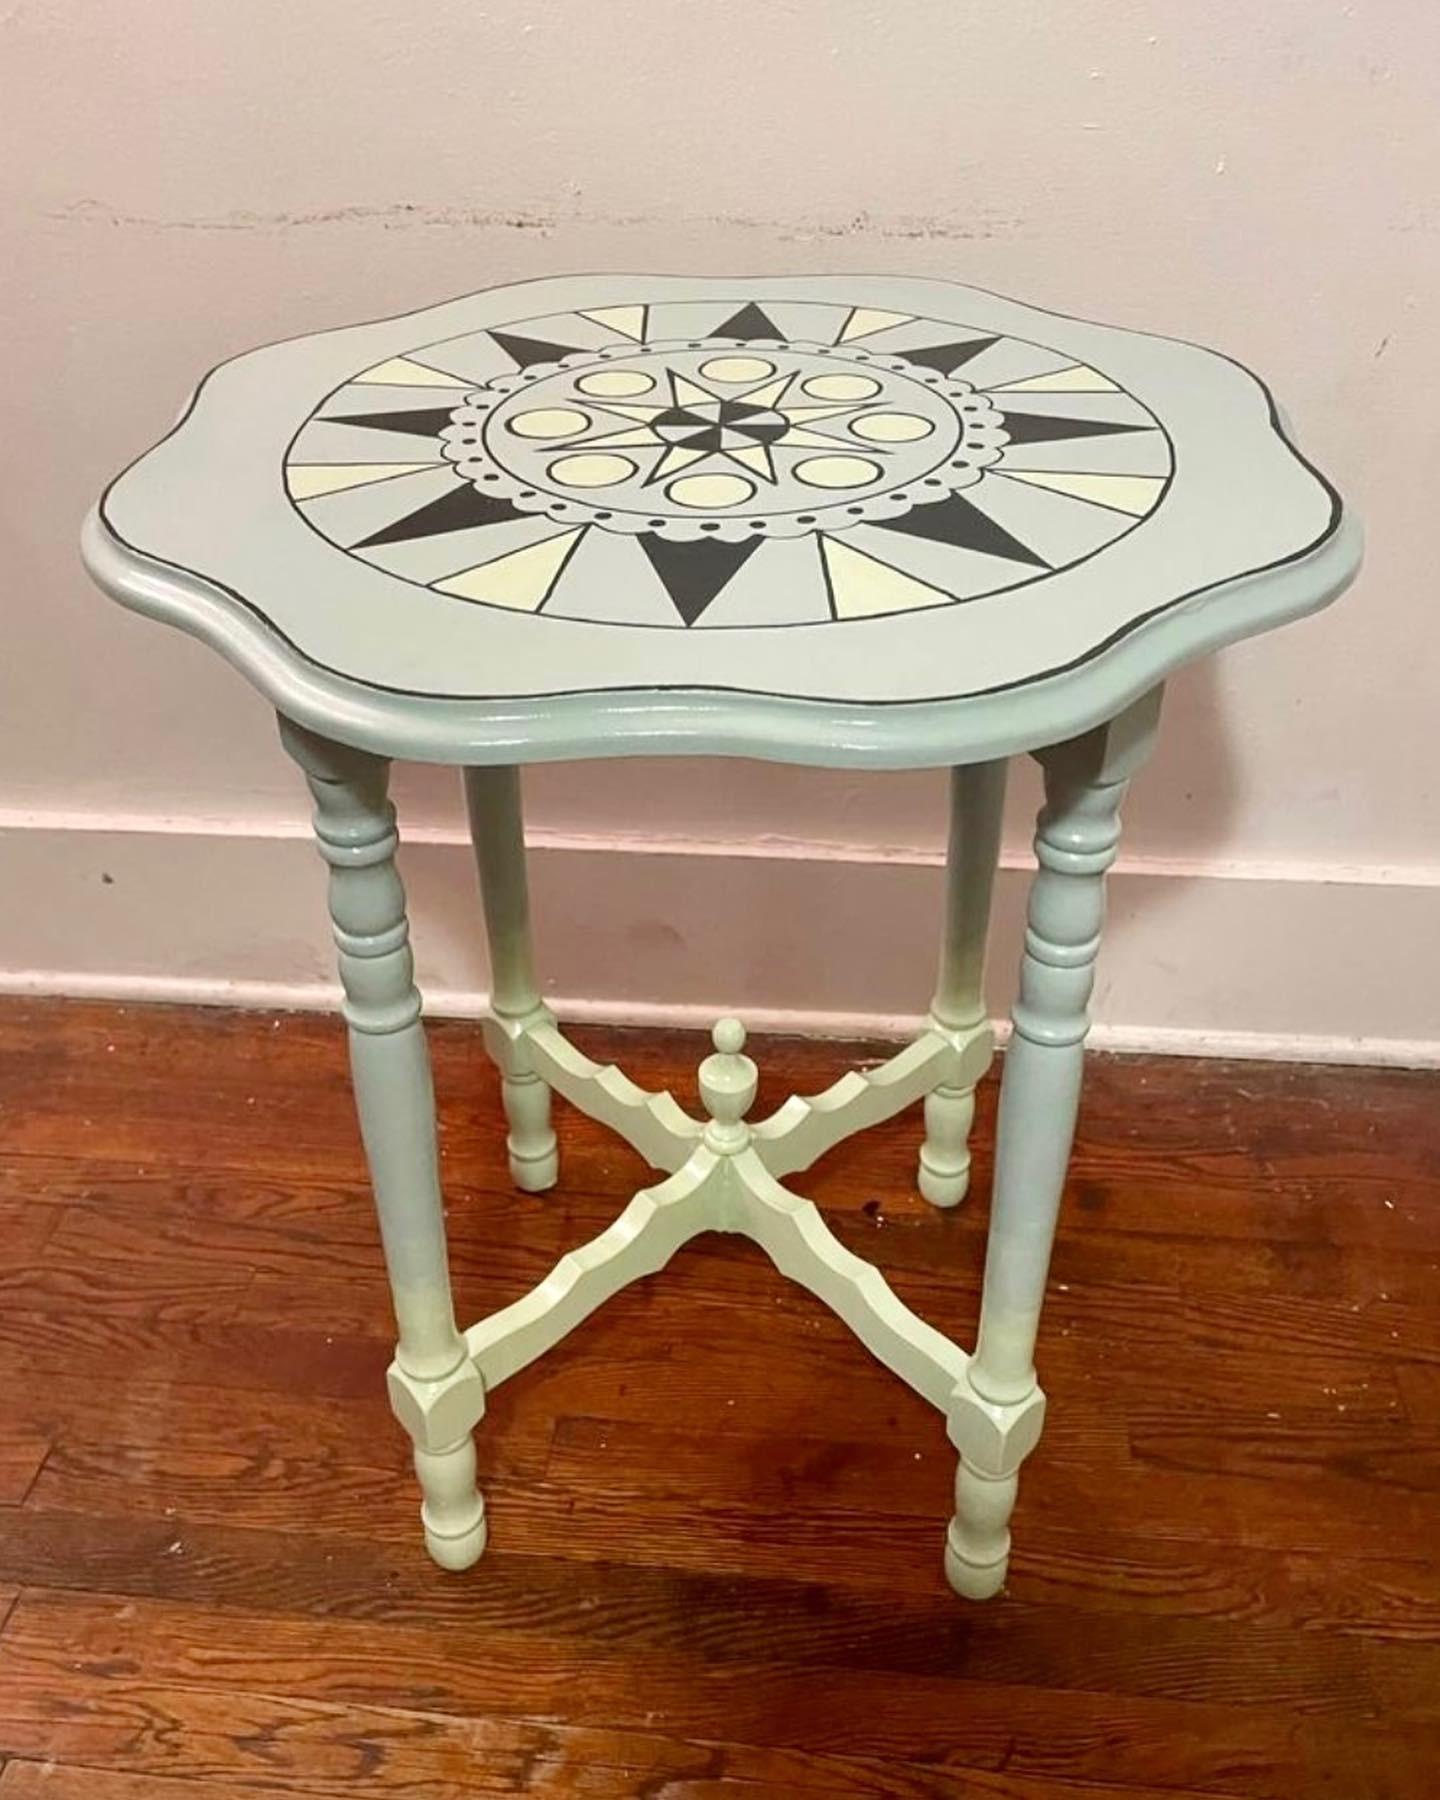 Refurbished table from junk